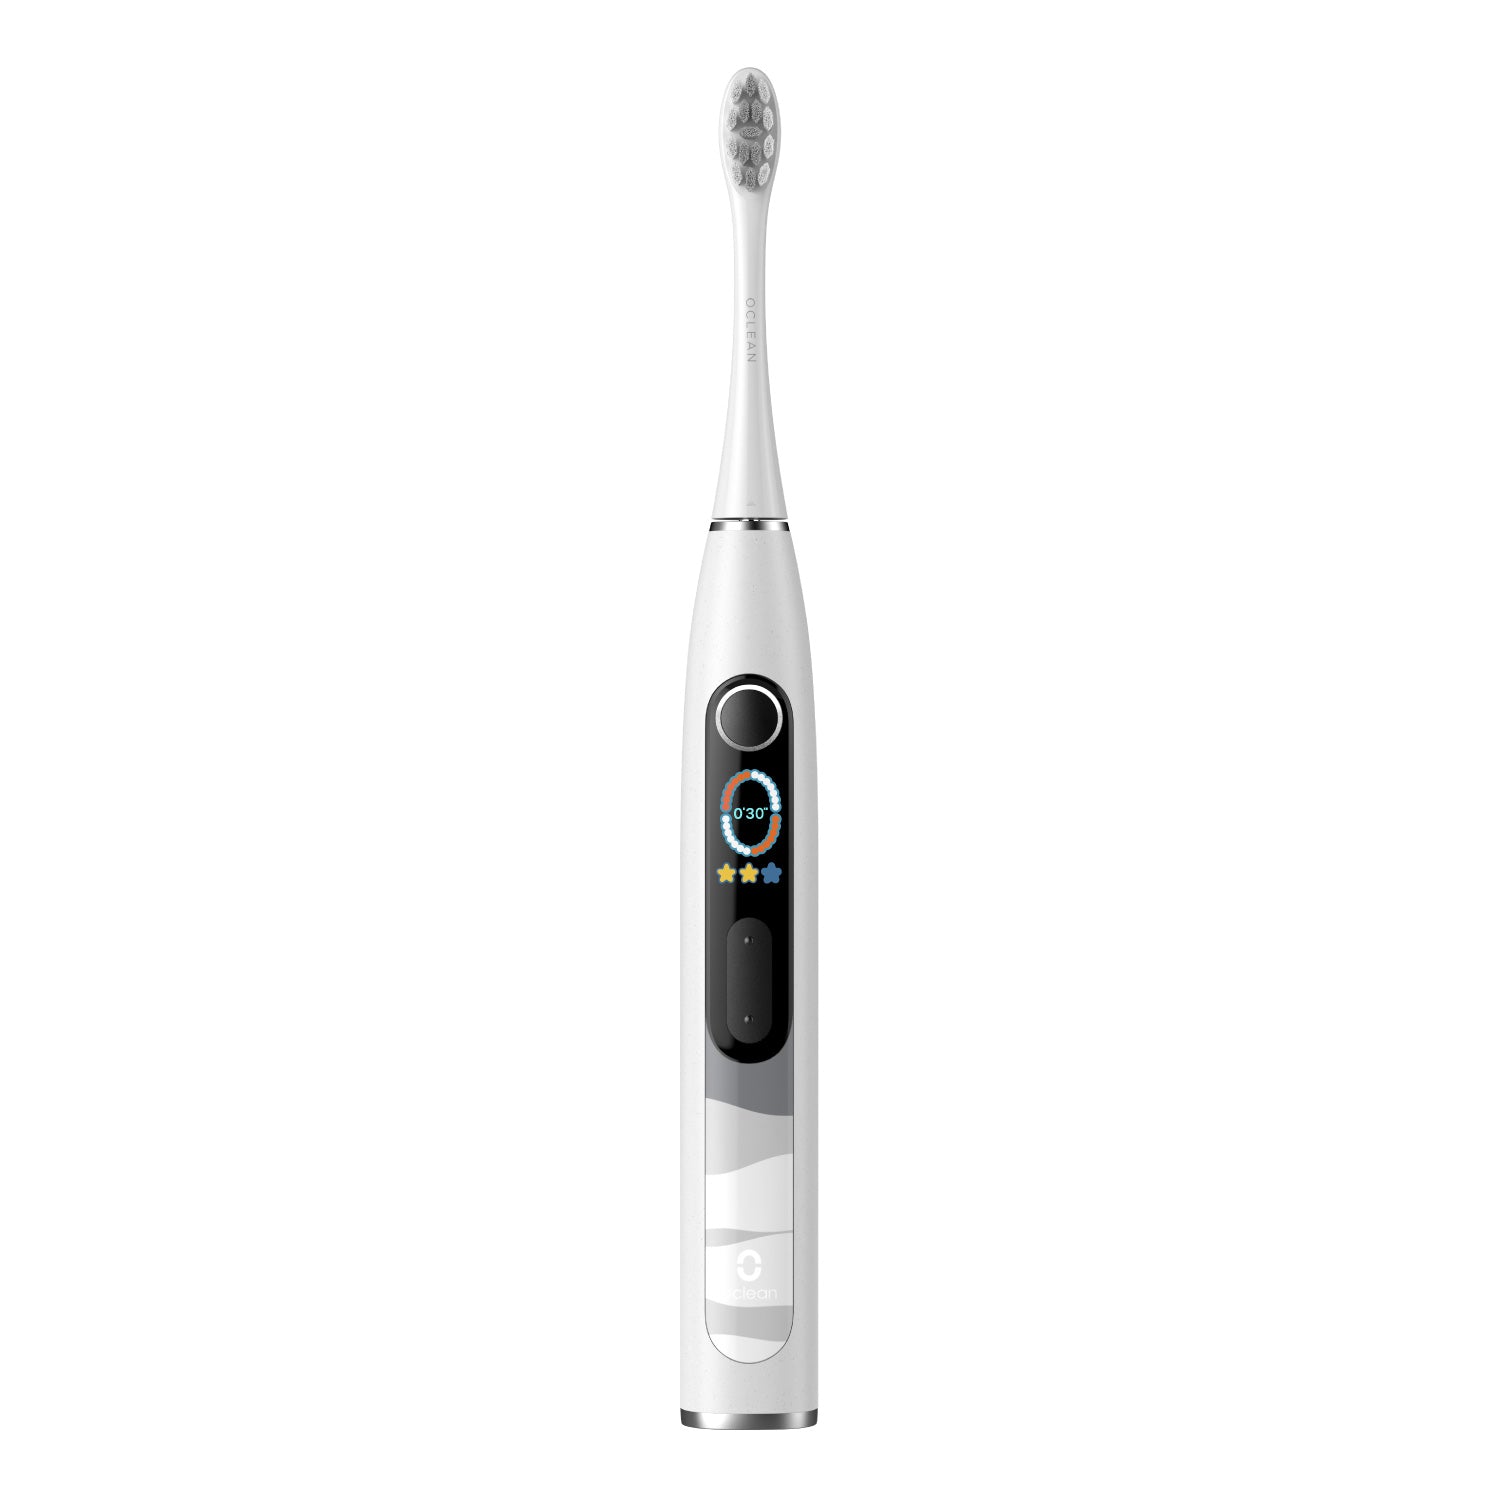 Oclean X10 Smart Sonic Electric Toothbrush Toothbrushes Gray  Oclean Official